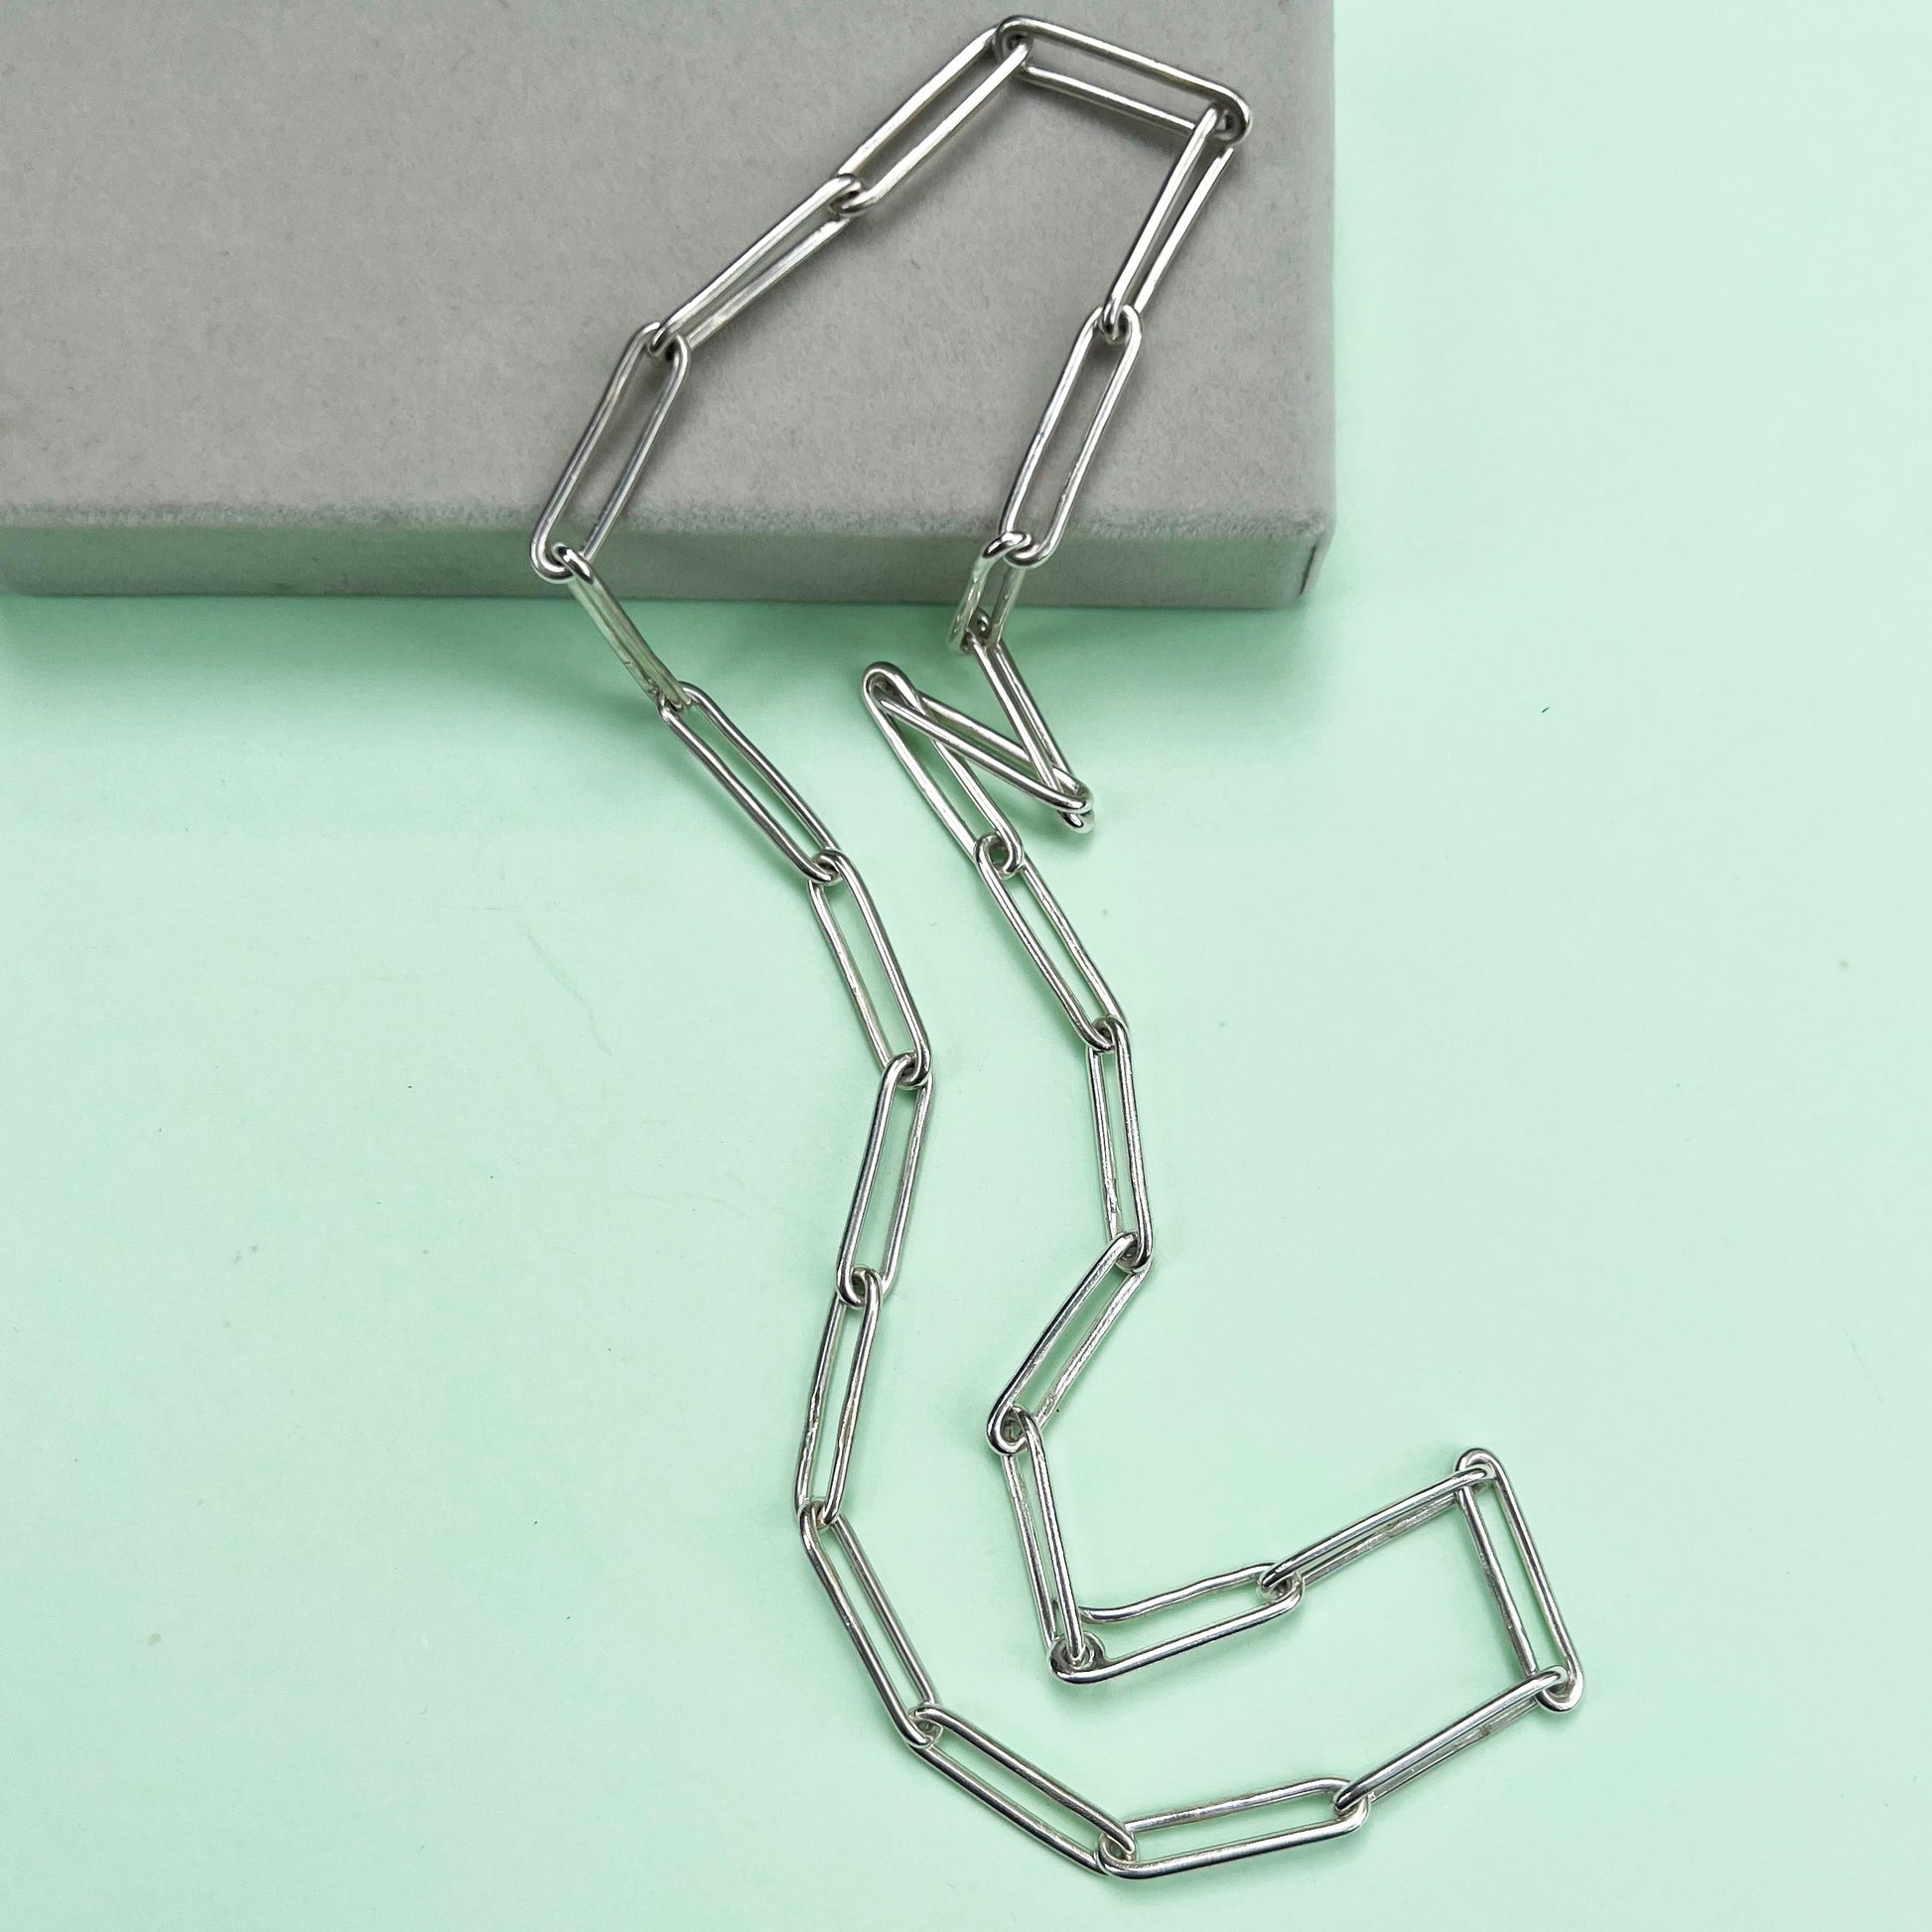  Chunky polished paperclip chain, Paperclip chain, LFW, London fashion week, London fashion week jewellery, polished silver paperclip chain, recycled silver, recycled silver paperclip chain, polished 20 inch paperclip chain